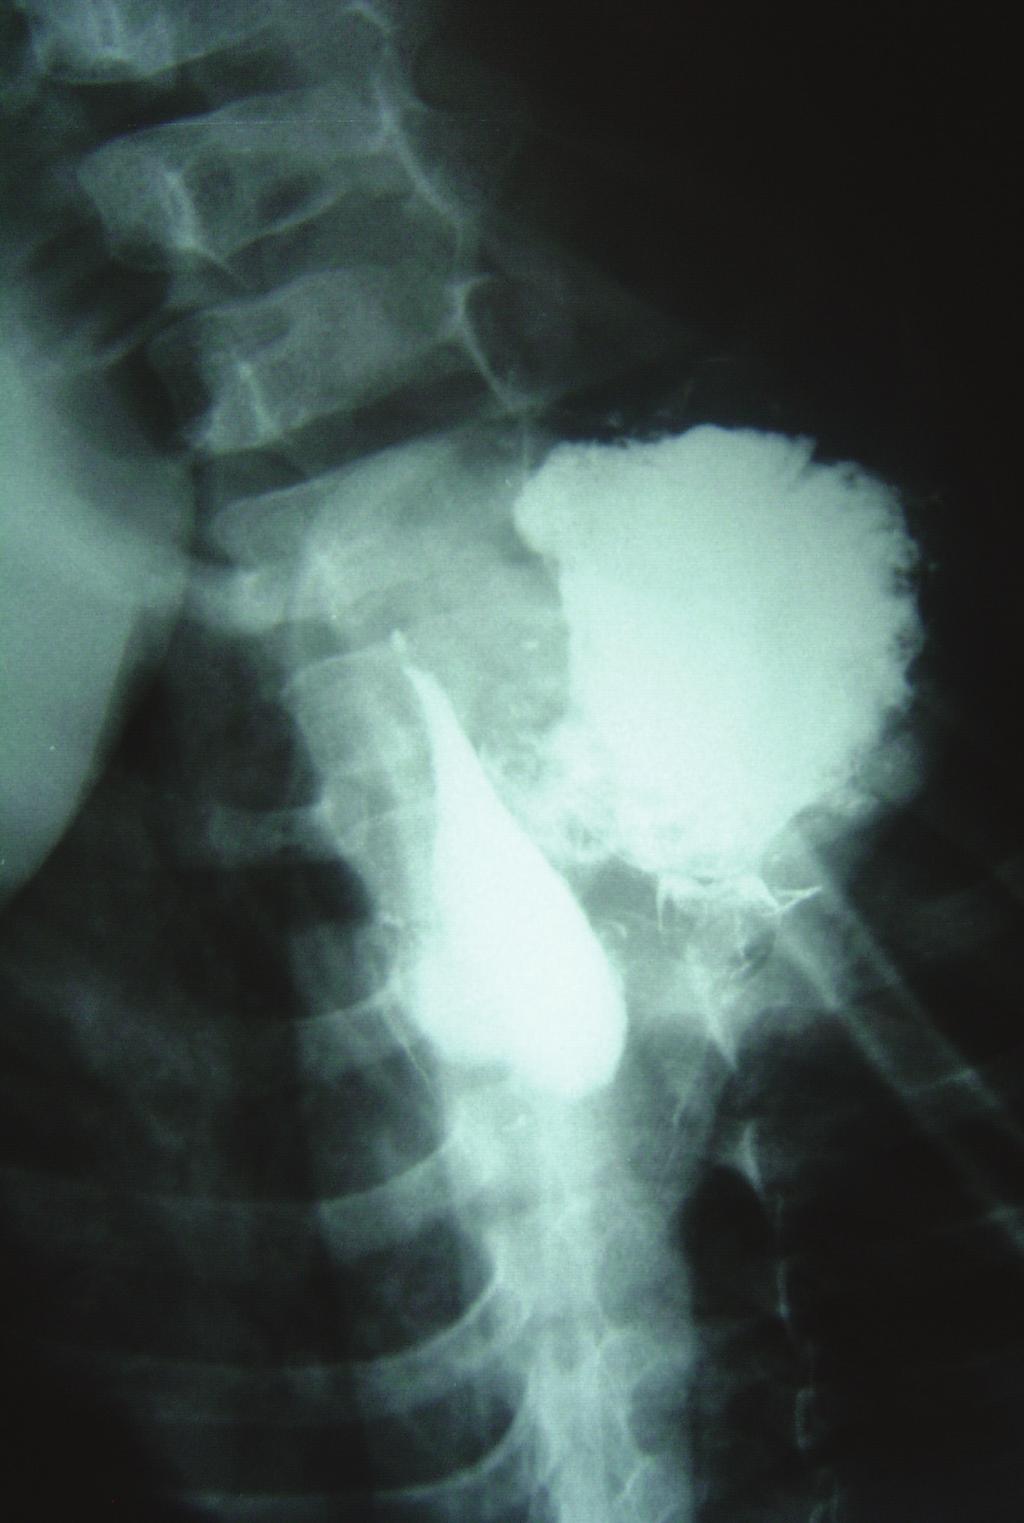 These may represent a combined type of sliding and paraesophageal hernias, or in the pediatric age group, congenital paraesophageal hernia is distinct and diﬀerent from its adult counterpart.